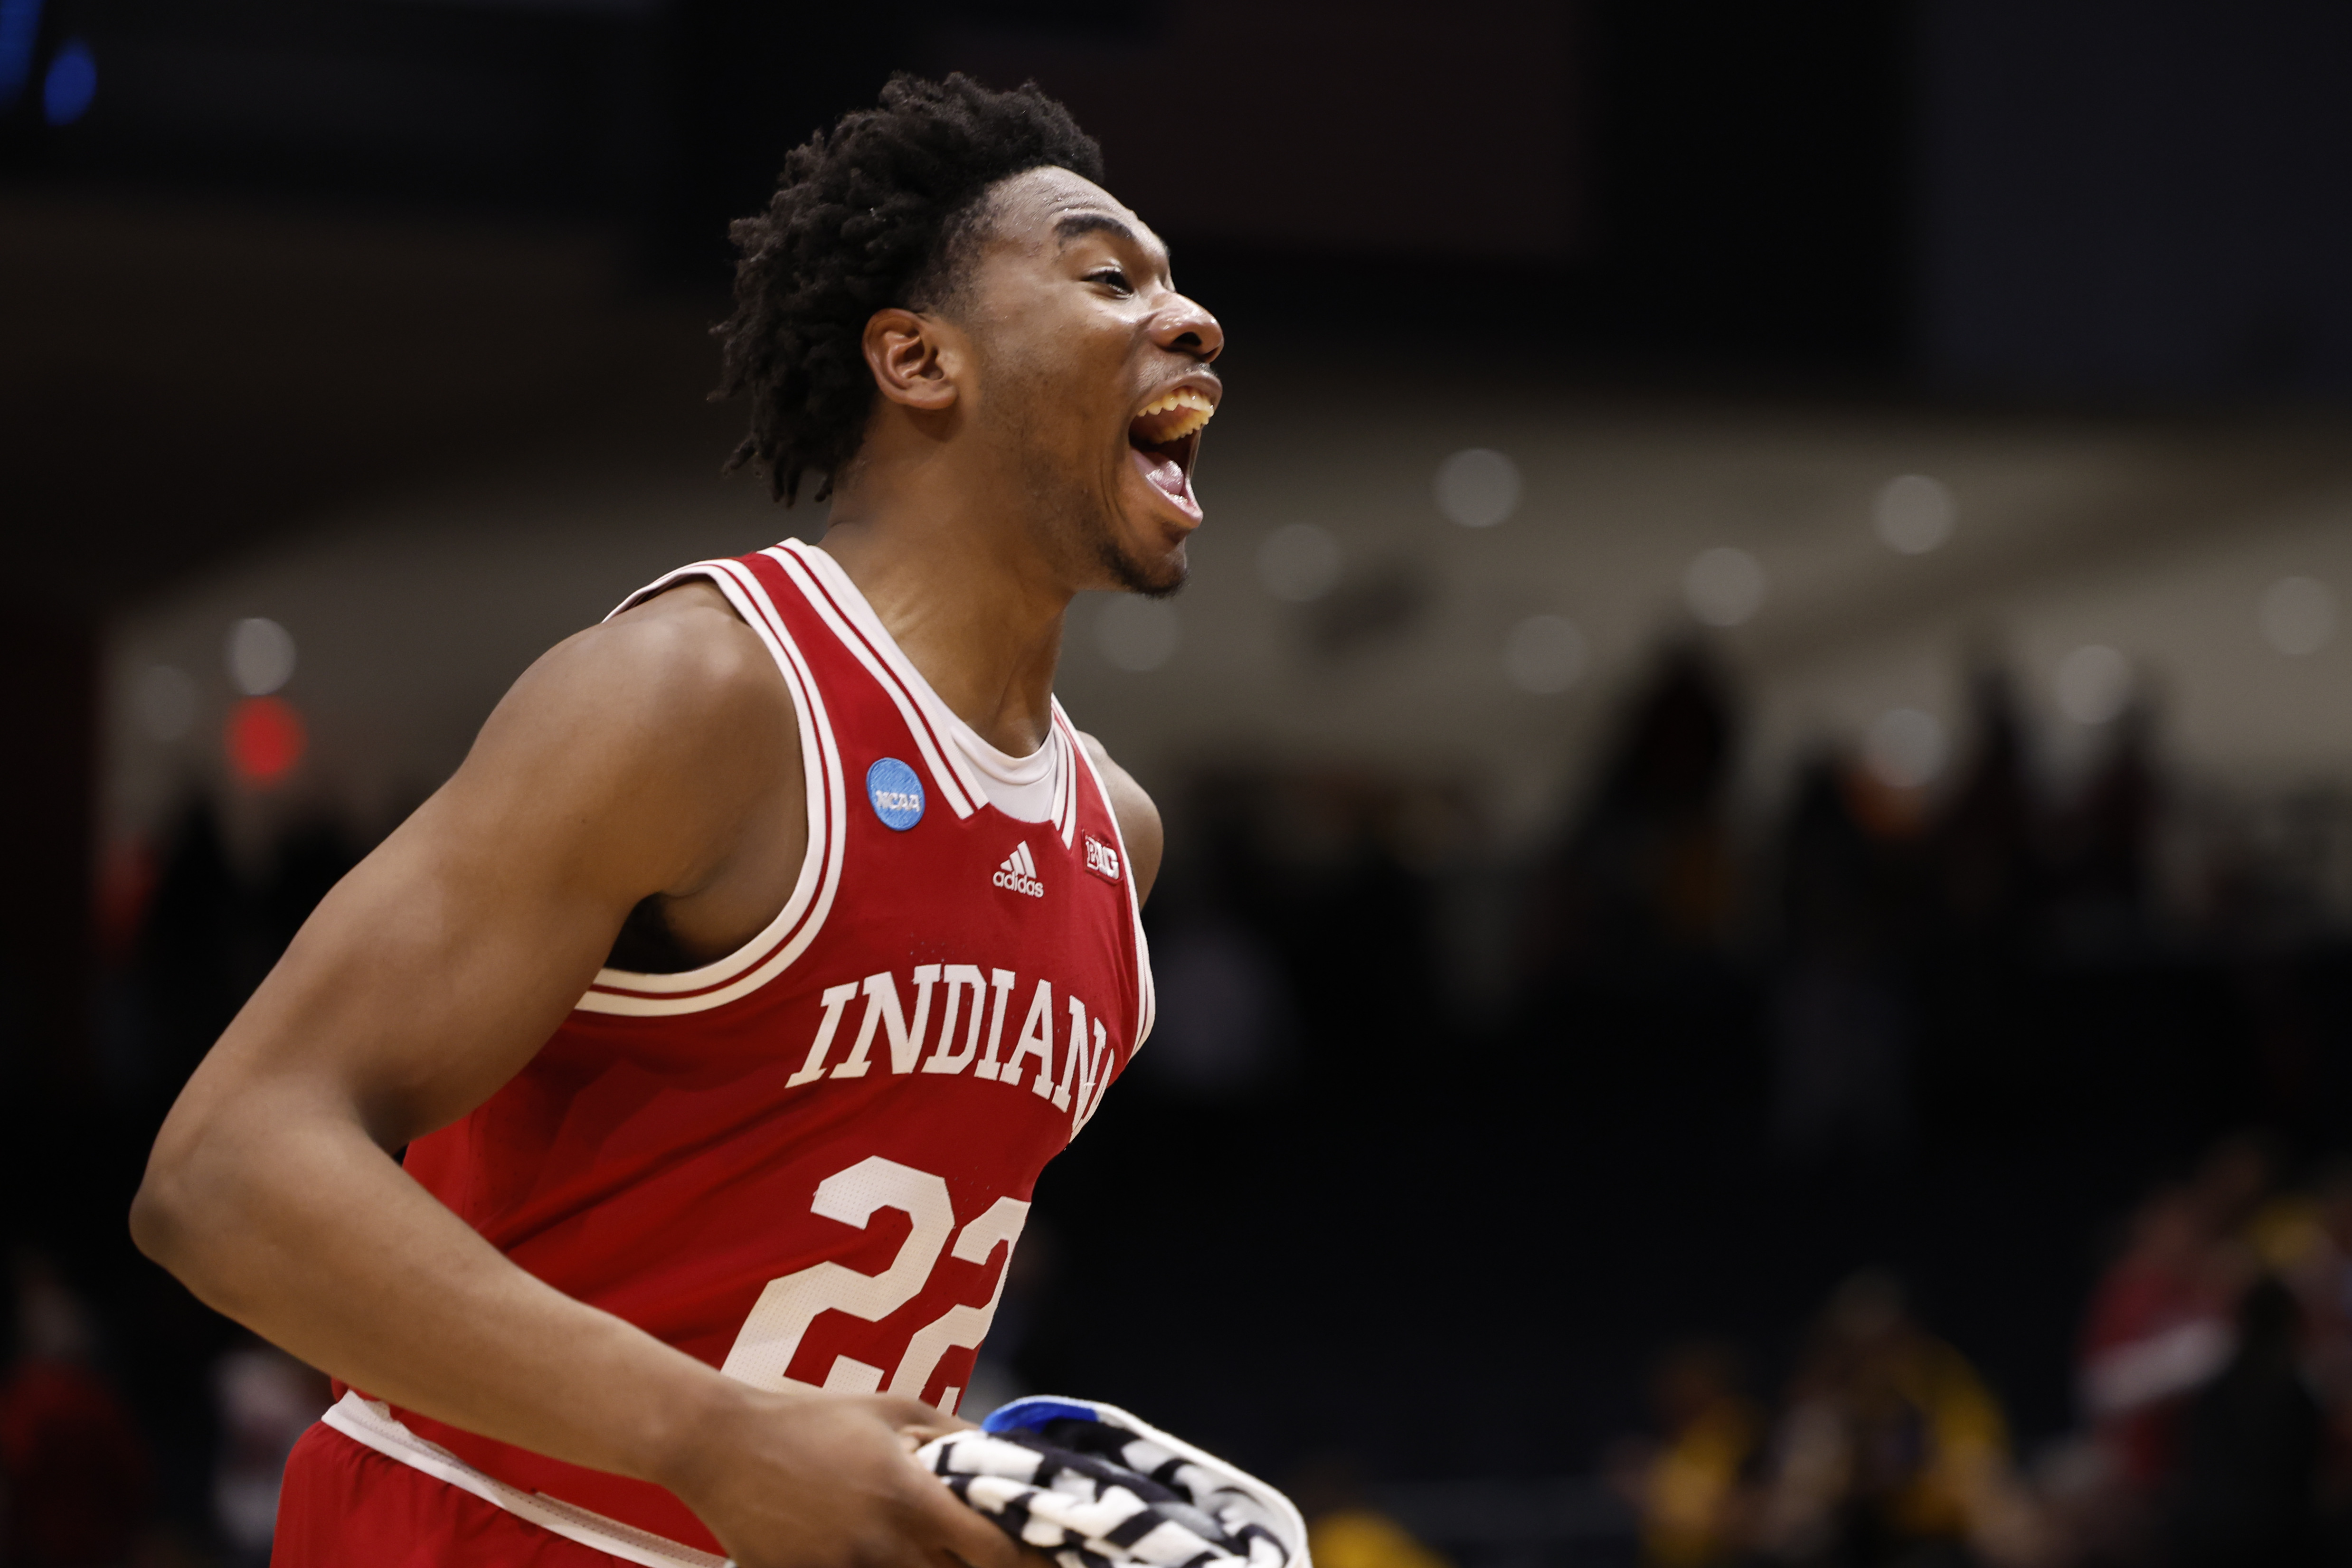 NCAA Basketball: NCAA Tournament First Four- Indiana at Wyoming